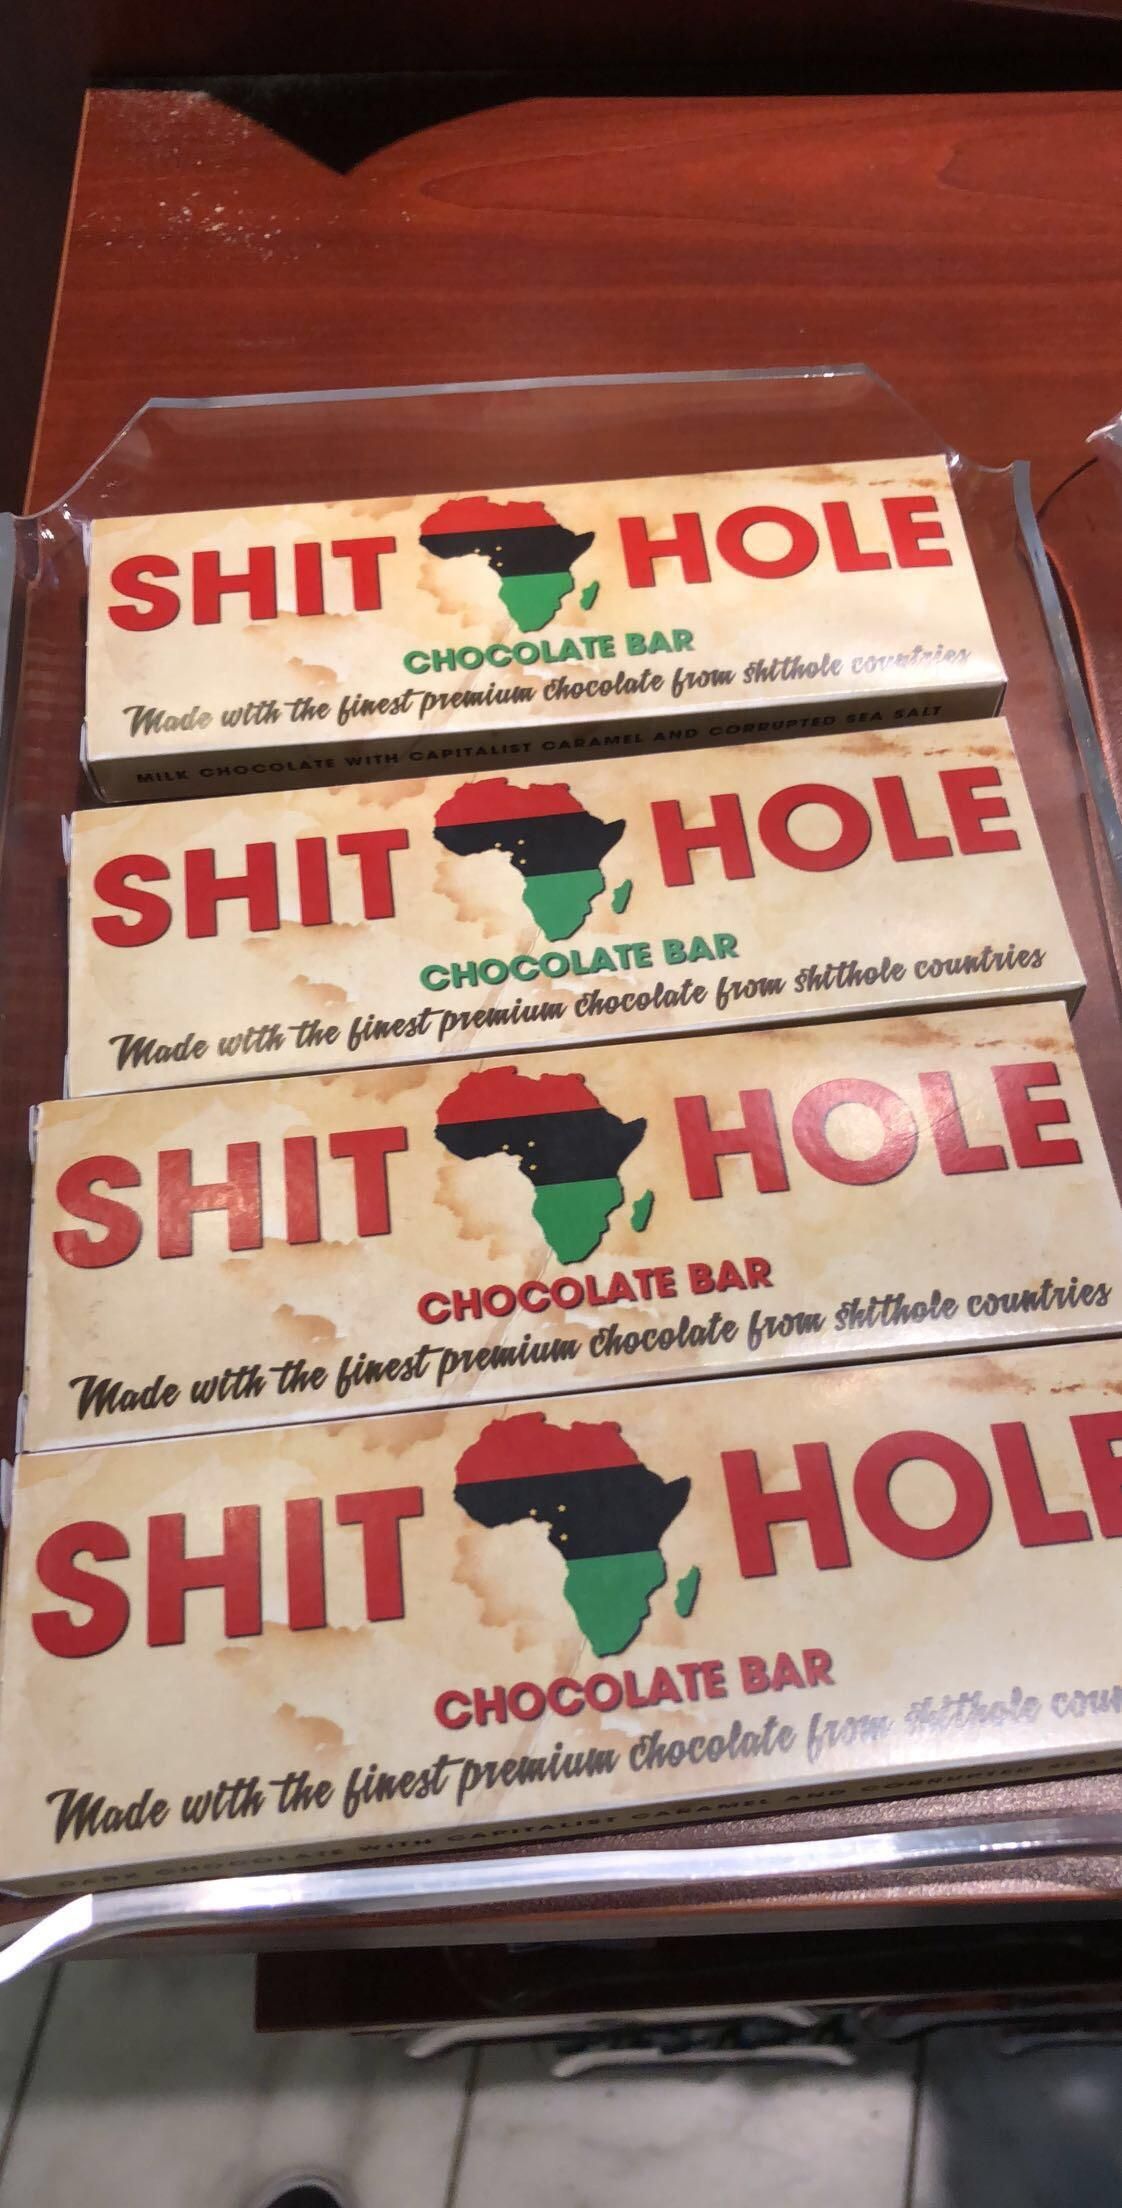 Found these chocolate bars in a candy store in LA